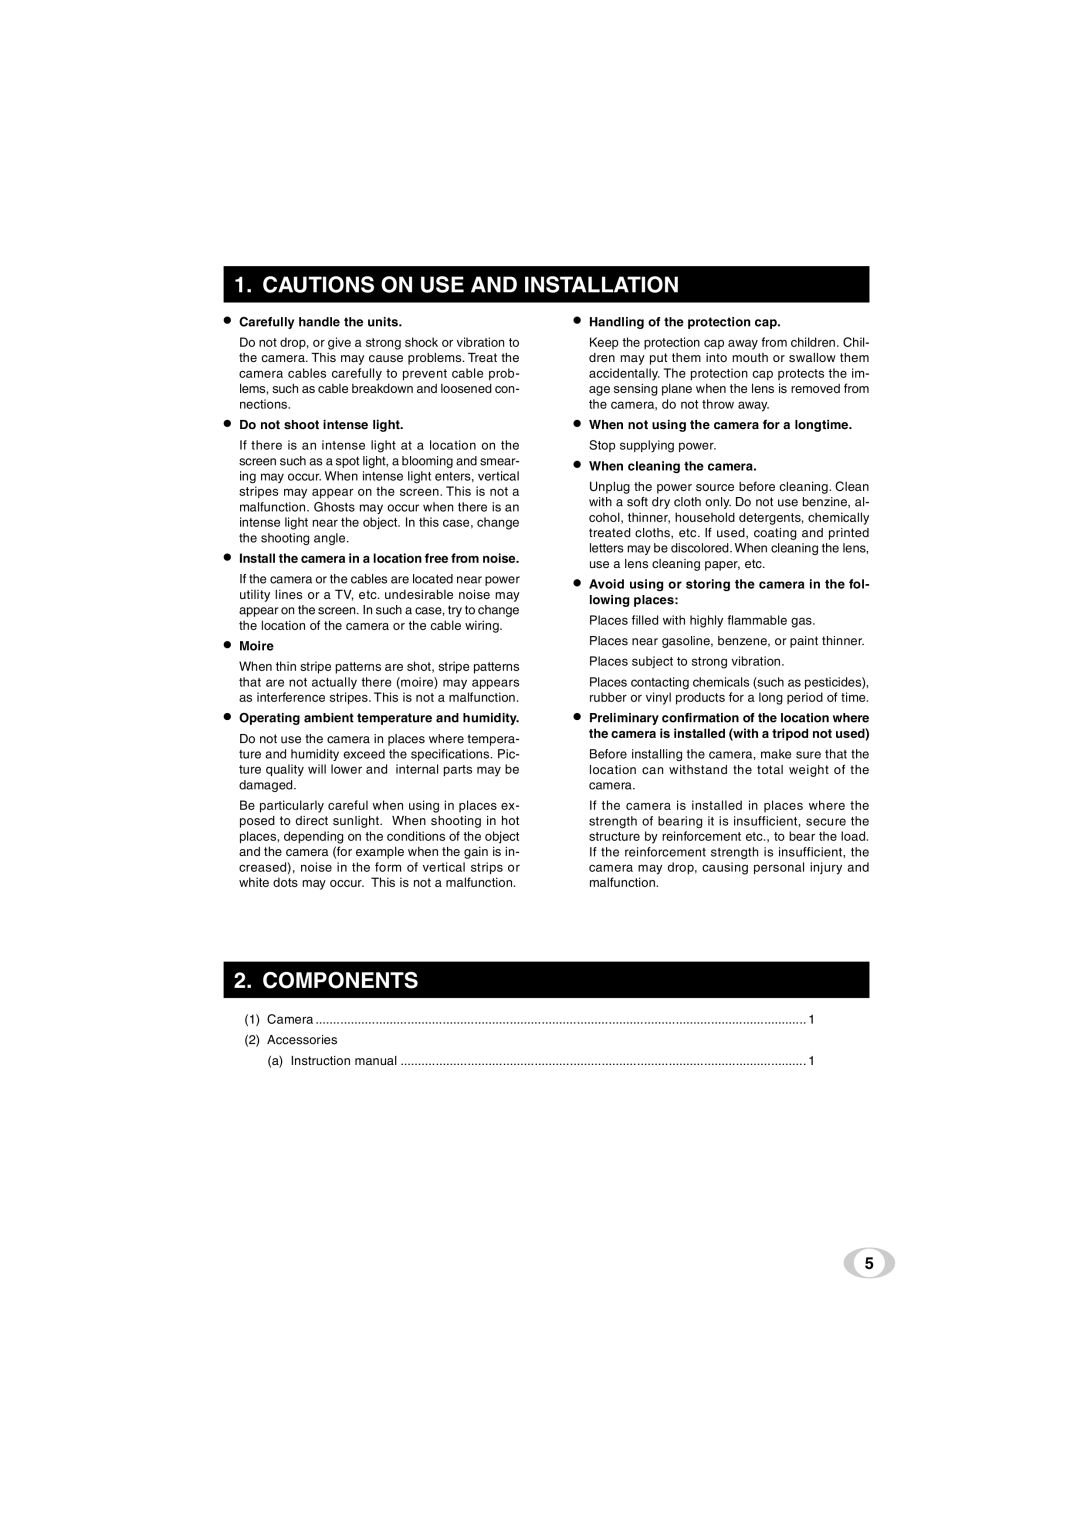 Toshiba IK-TF5C instruction manual Cautions On Use And Installation, Components 